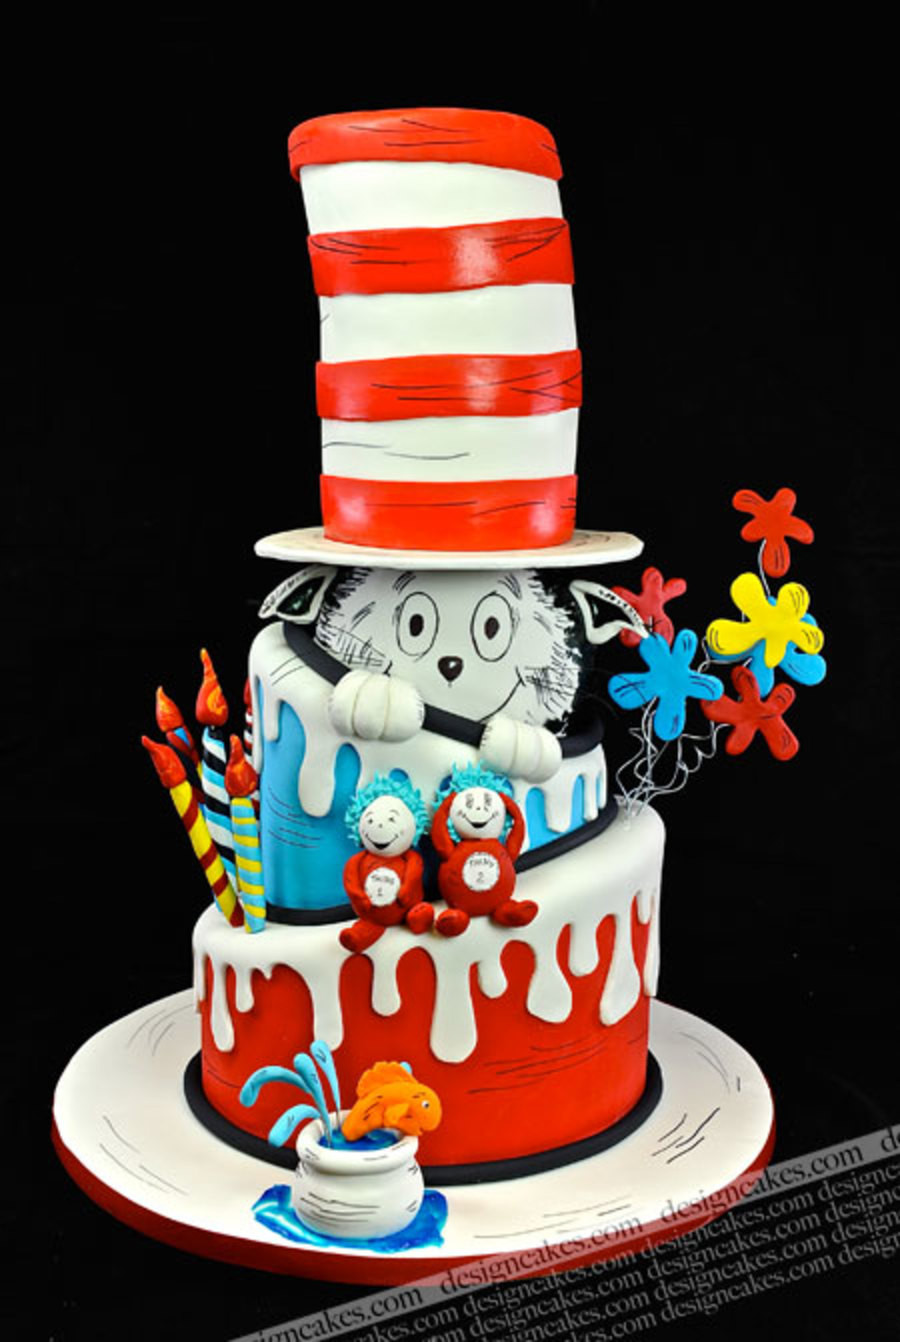 Dr Seuss Birthday Cakes
 Cat In The Hat Cake Druss Cake CakeCentral